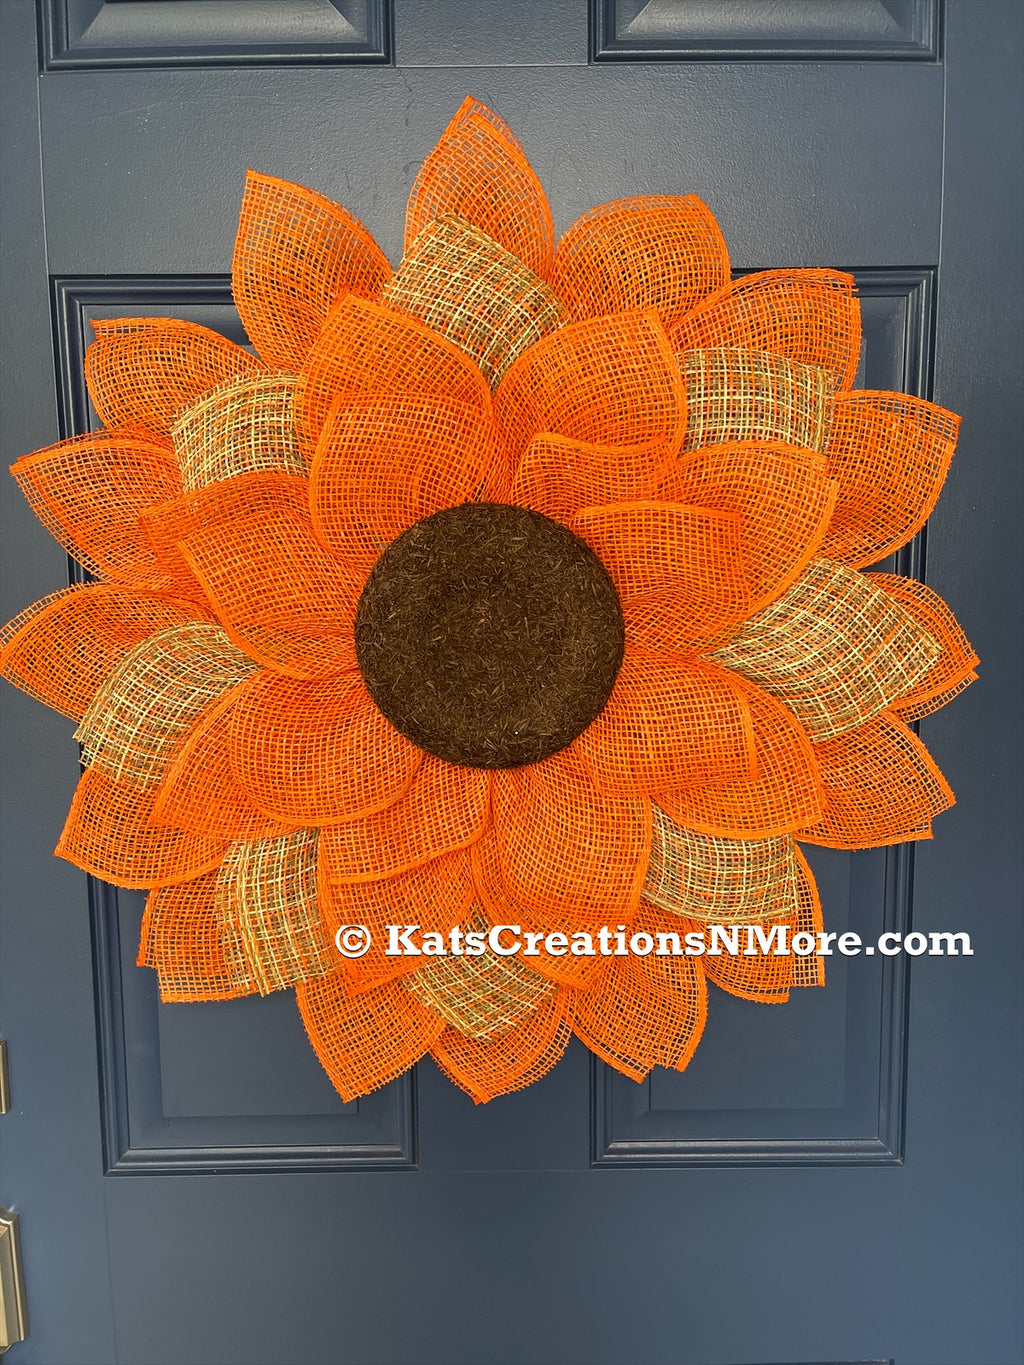 Poly Burlap Mesh Sunflower Wreath Featuring Orange and Patterned Colors of Yellow, Brown and Orange with a Brown Center on a Blue Door